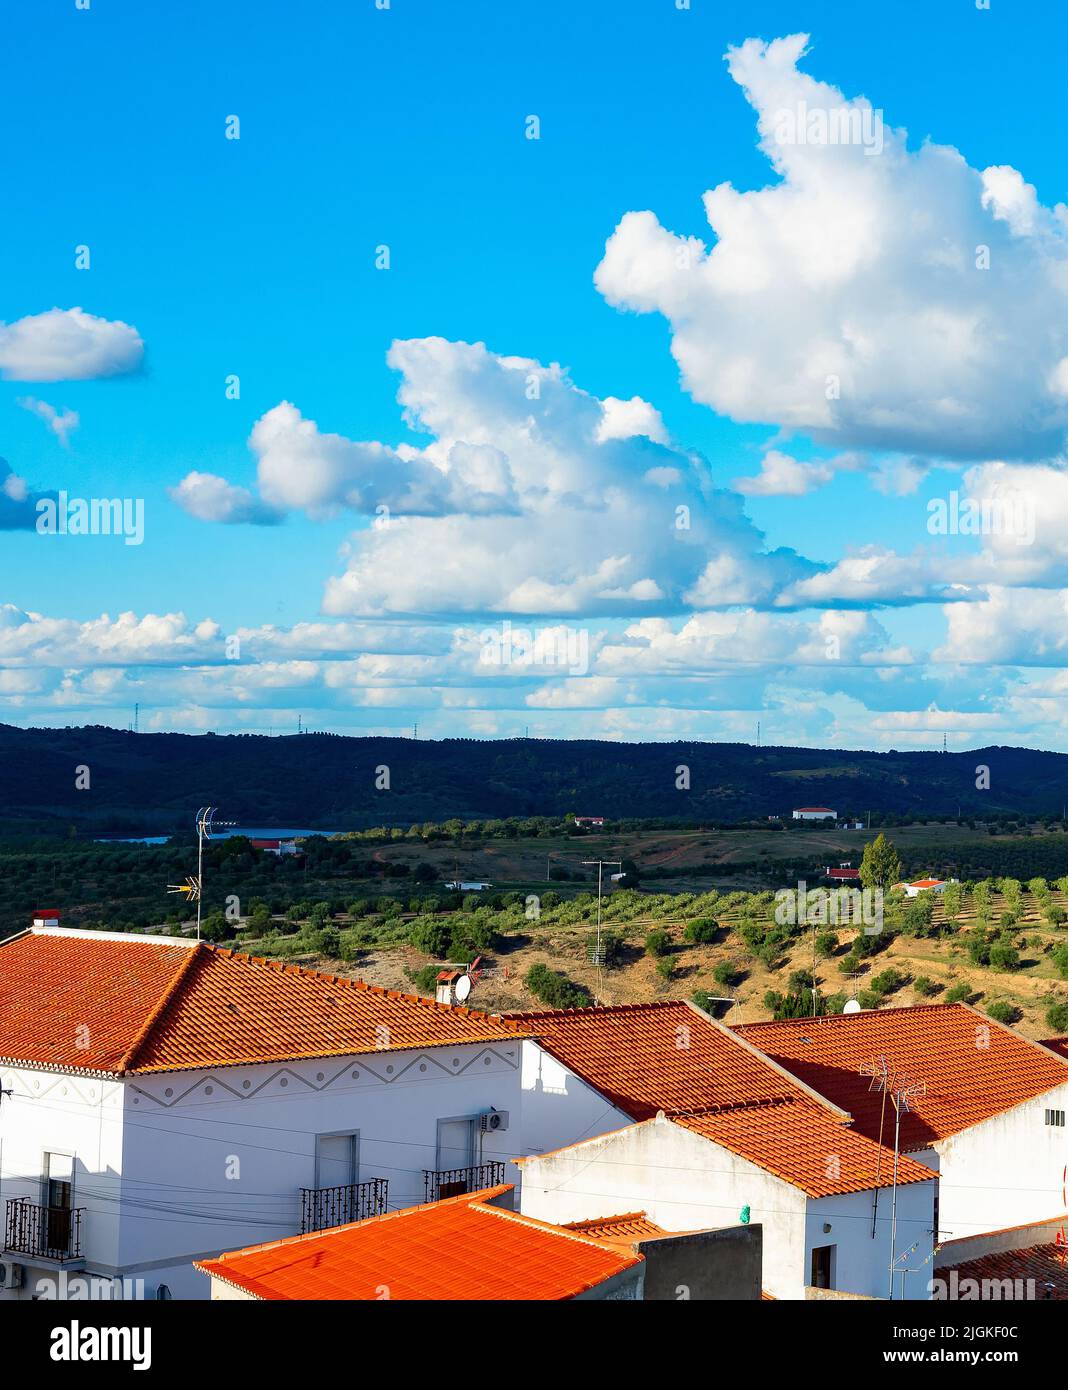 Natural landscape scene with village and olive gardens view, mountains and clouds, Spain Stock Photo